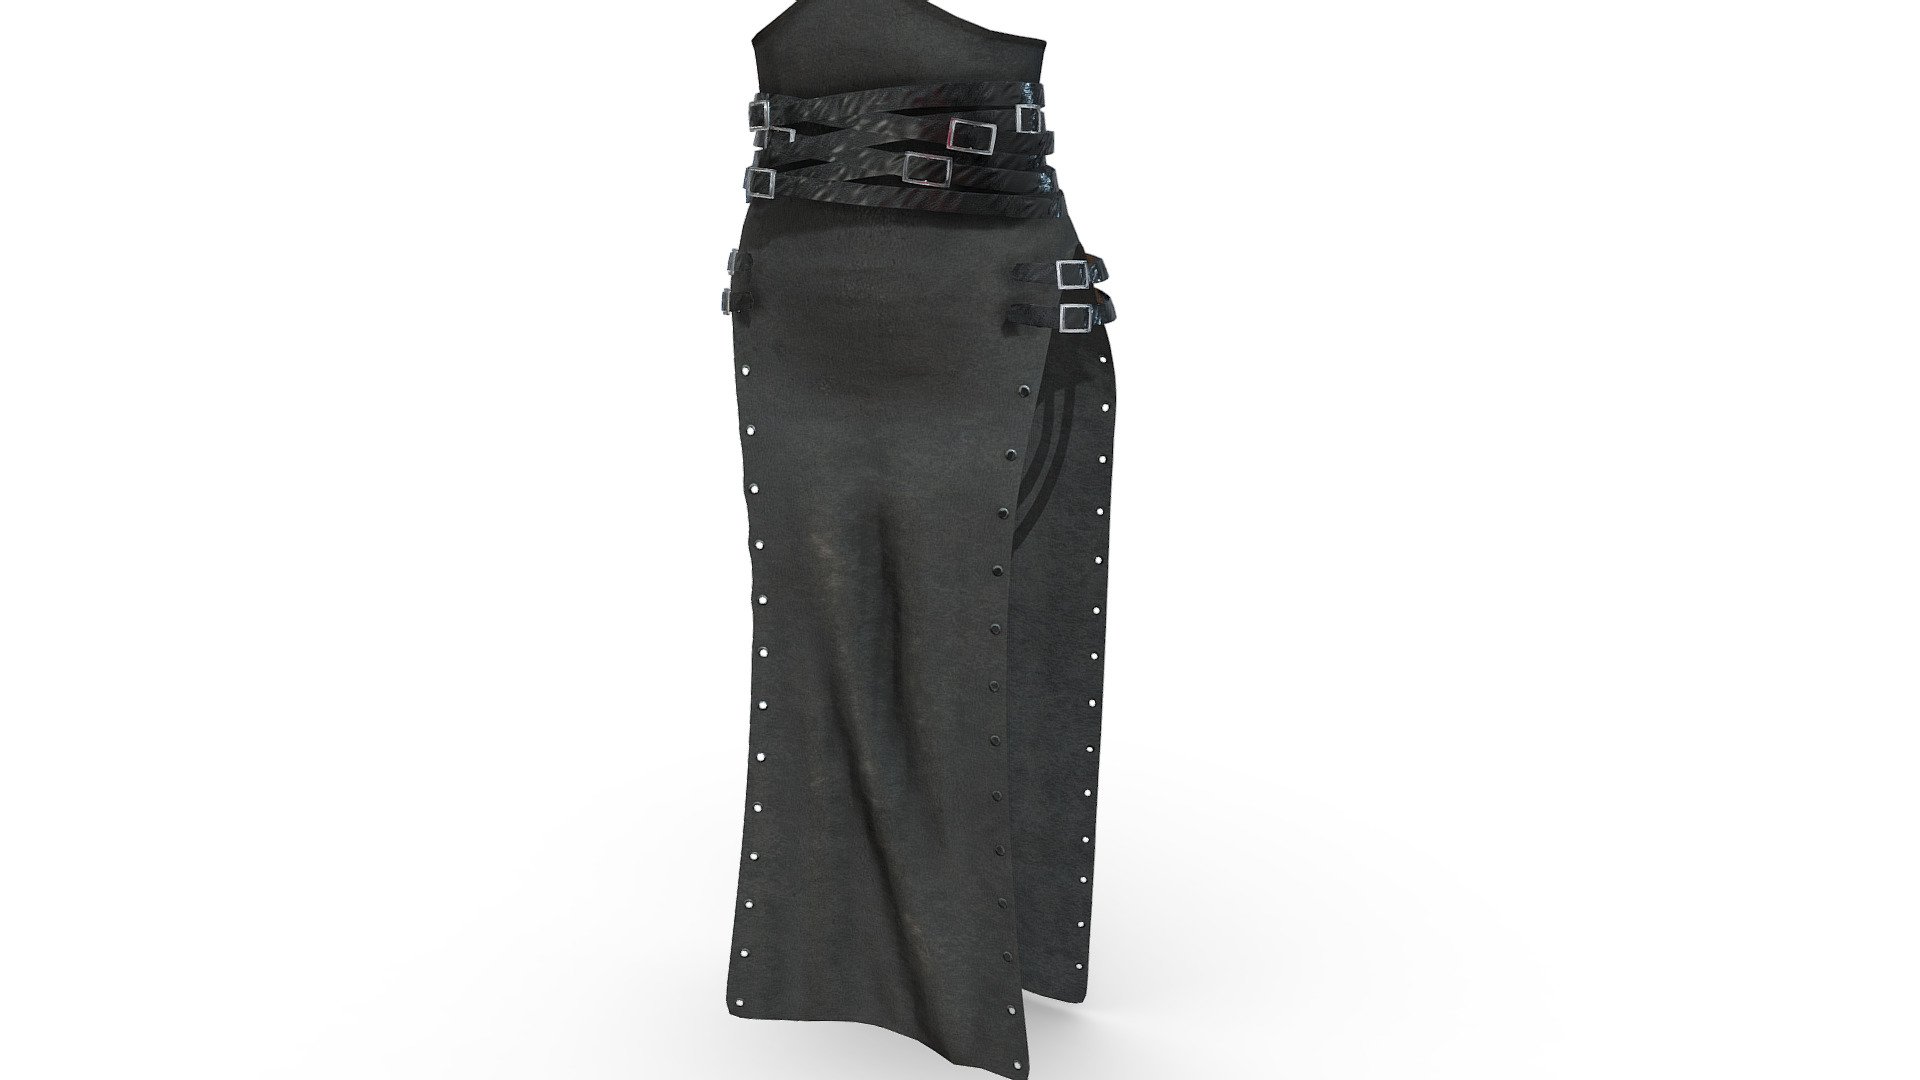 Female Medieval Loin Cloth Long Skirt

Can be fitted to any character

Clean topology

No overlapping smart optimized unwrapped UVs

High-quality realistic textures

FBX, OBJ, gITF, USDZ (request other formats)

PBR or Classic

Type     user:3dia &ldquo;search term